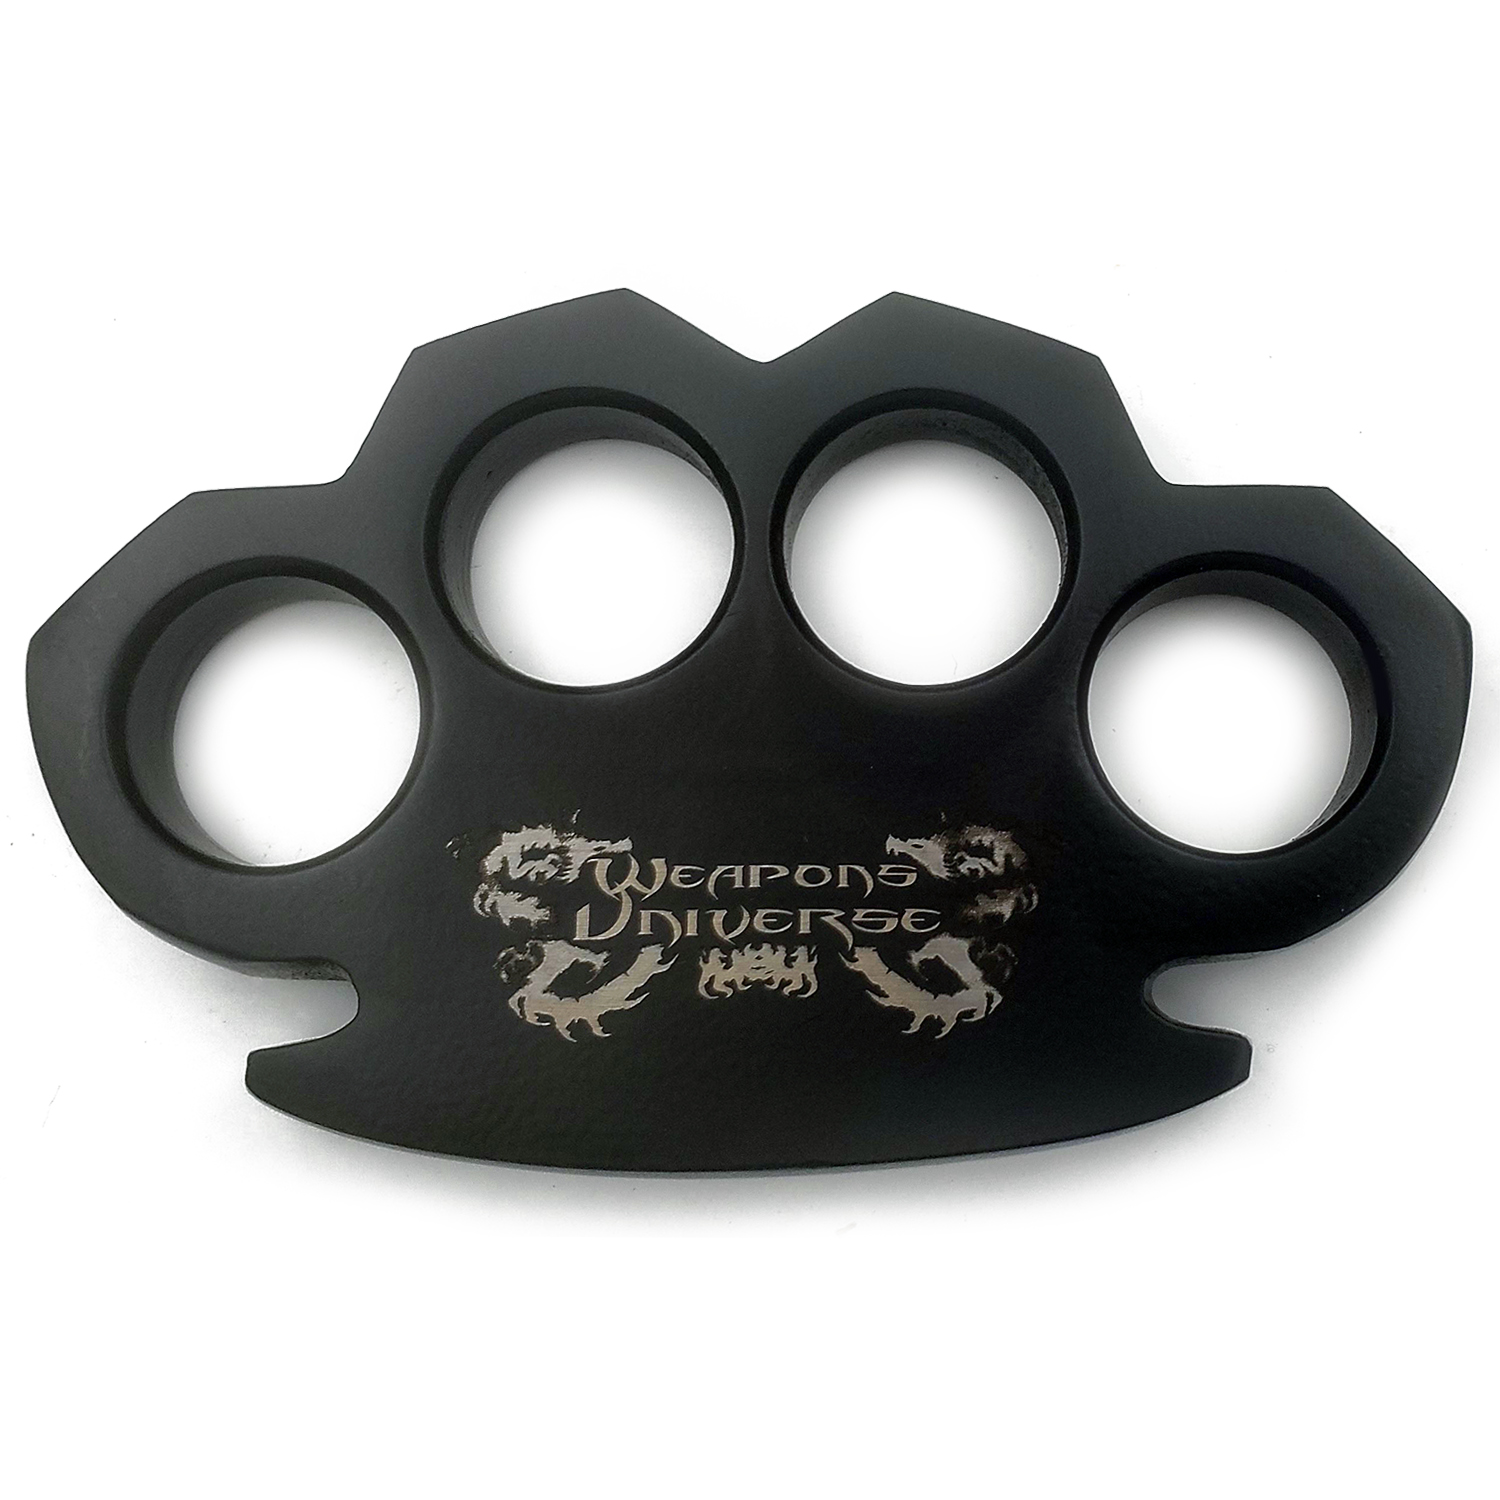 CI 600 BK CL WU Weapons Universe Exclusive Massive Steampunk Brass Knuckles